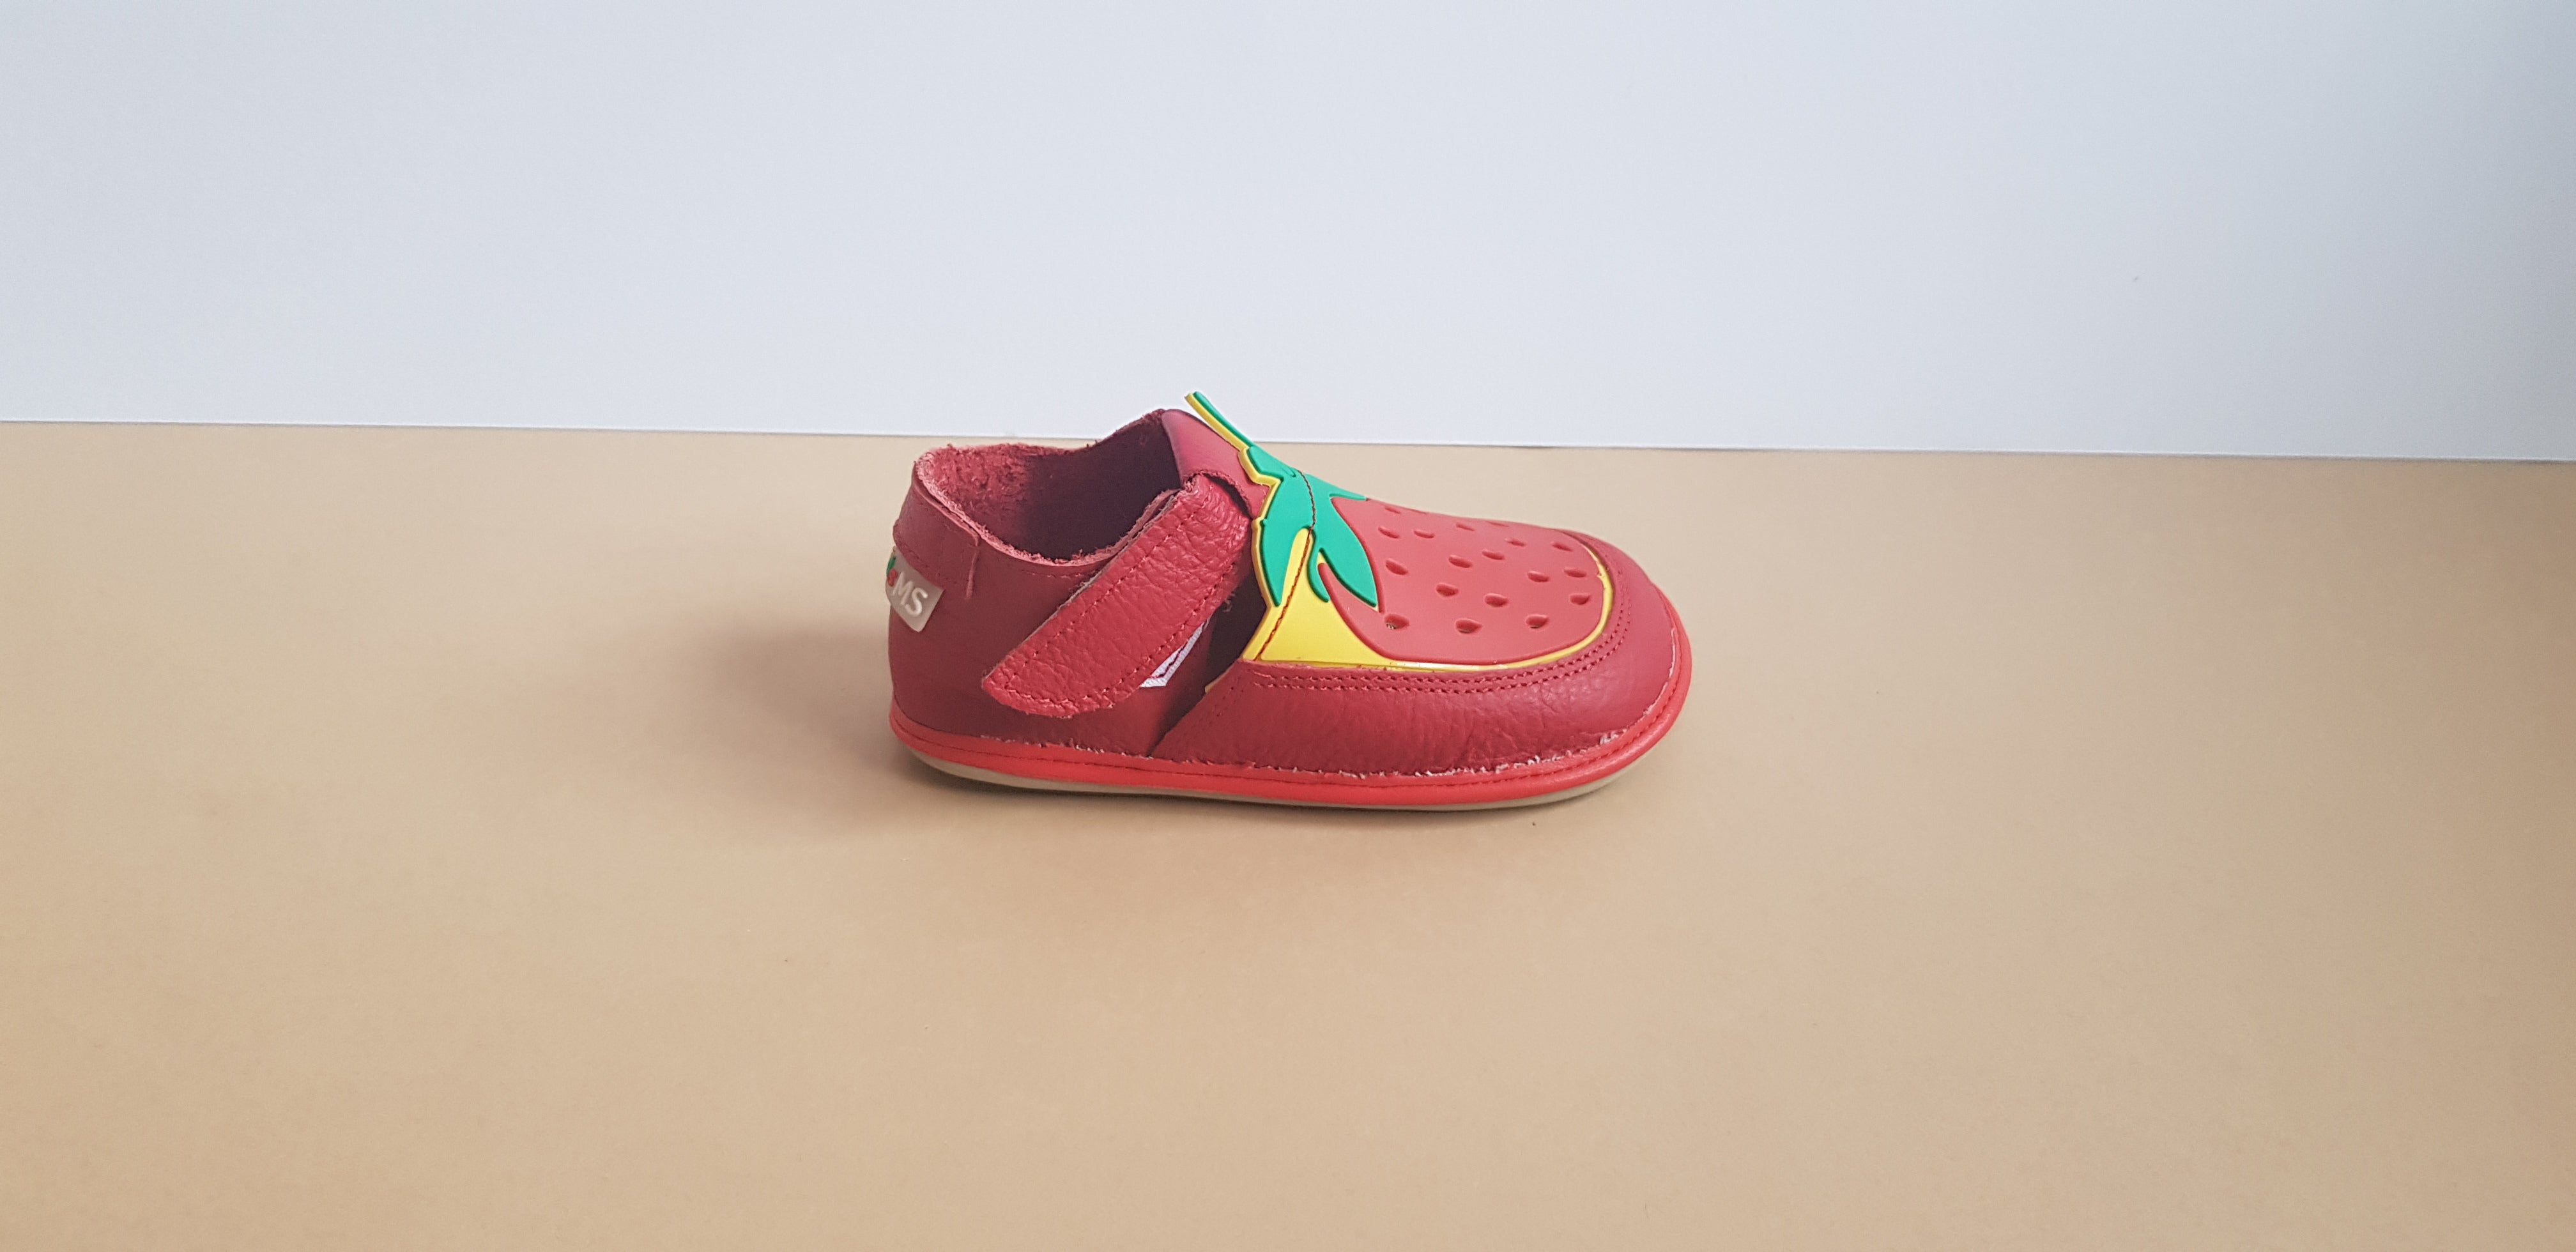 Barefoot Leather Flexible Kids shoes anatomically shaped with a strawberry motive